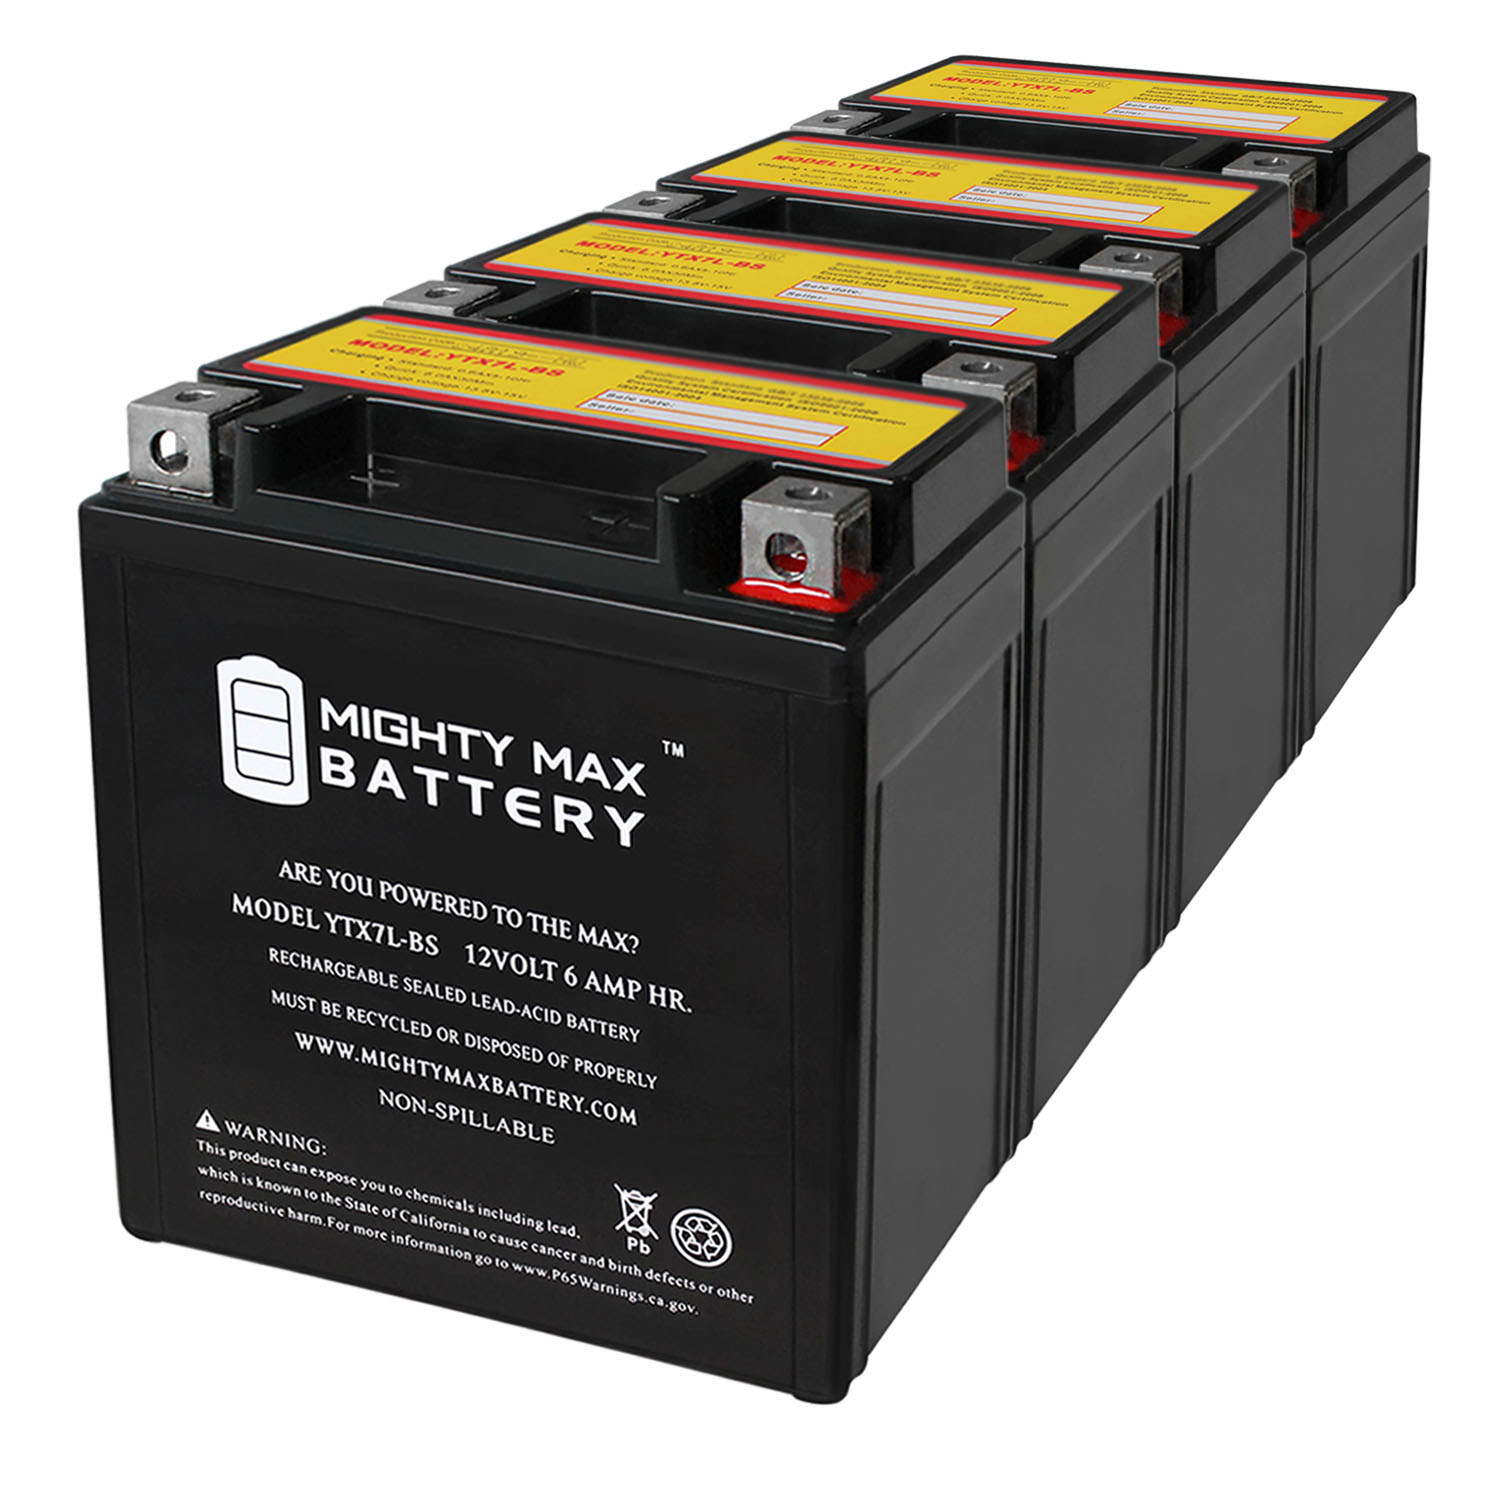 YTX7L-BS 12V 6Ah Replacement Battery Compatible with Moose Division 2113-0228 - 4 Pack